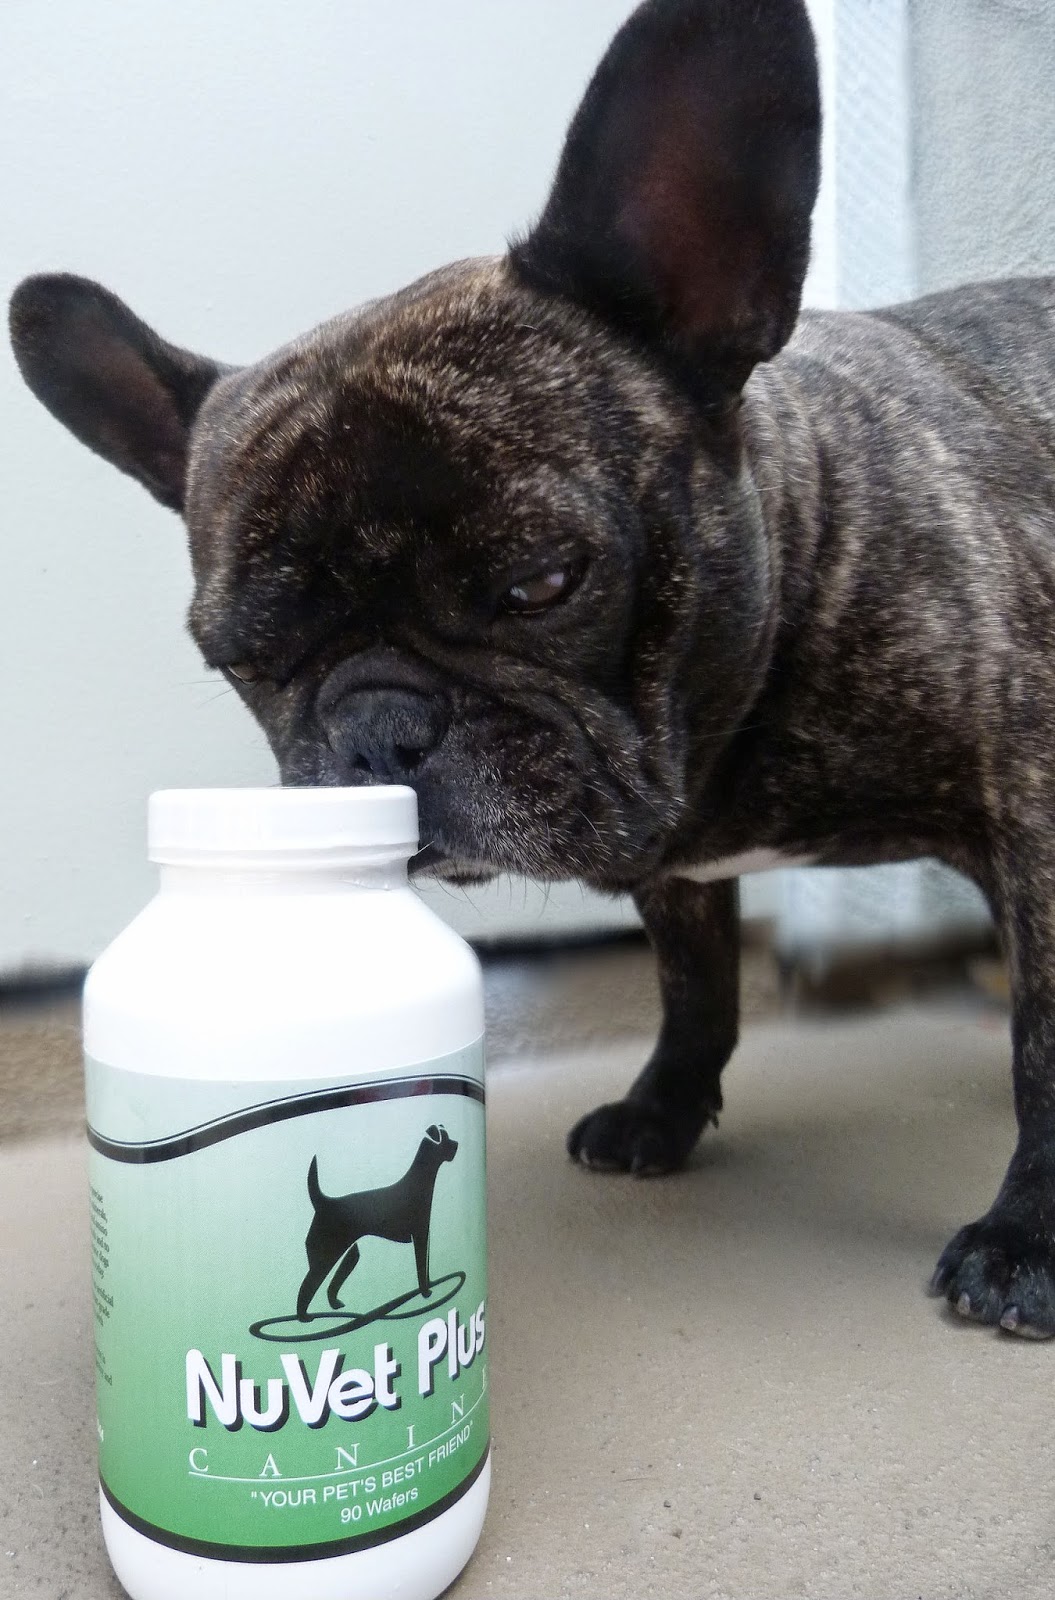 valium dosage for dogs can i give human vitamins